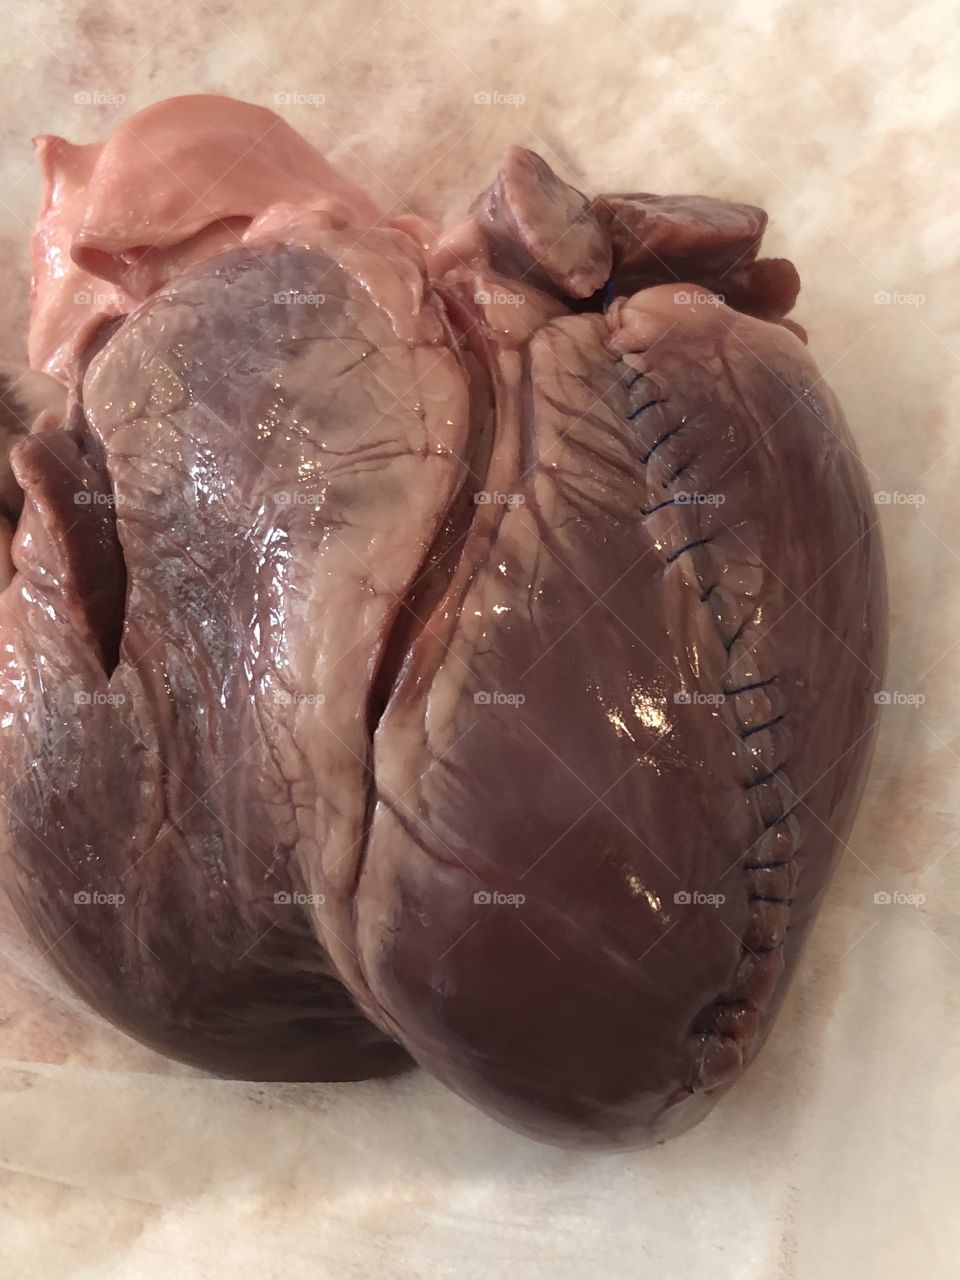 Heart dissection 